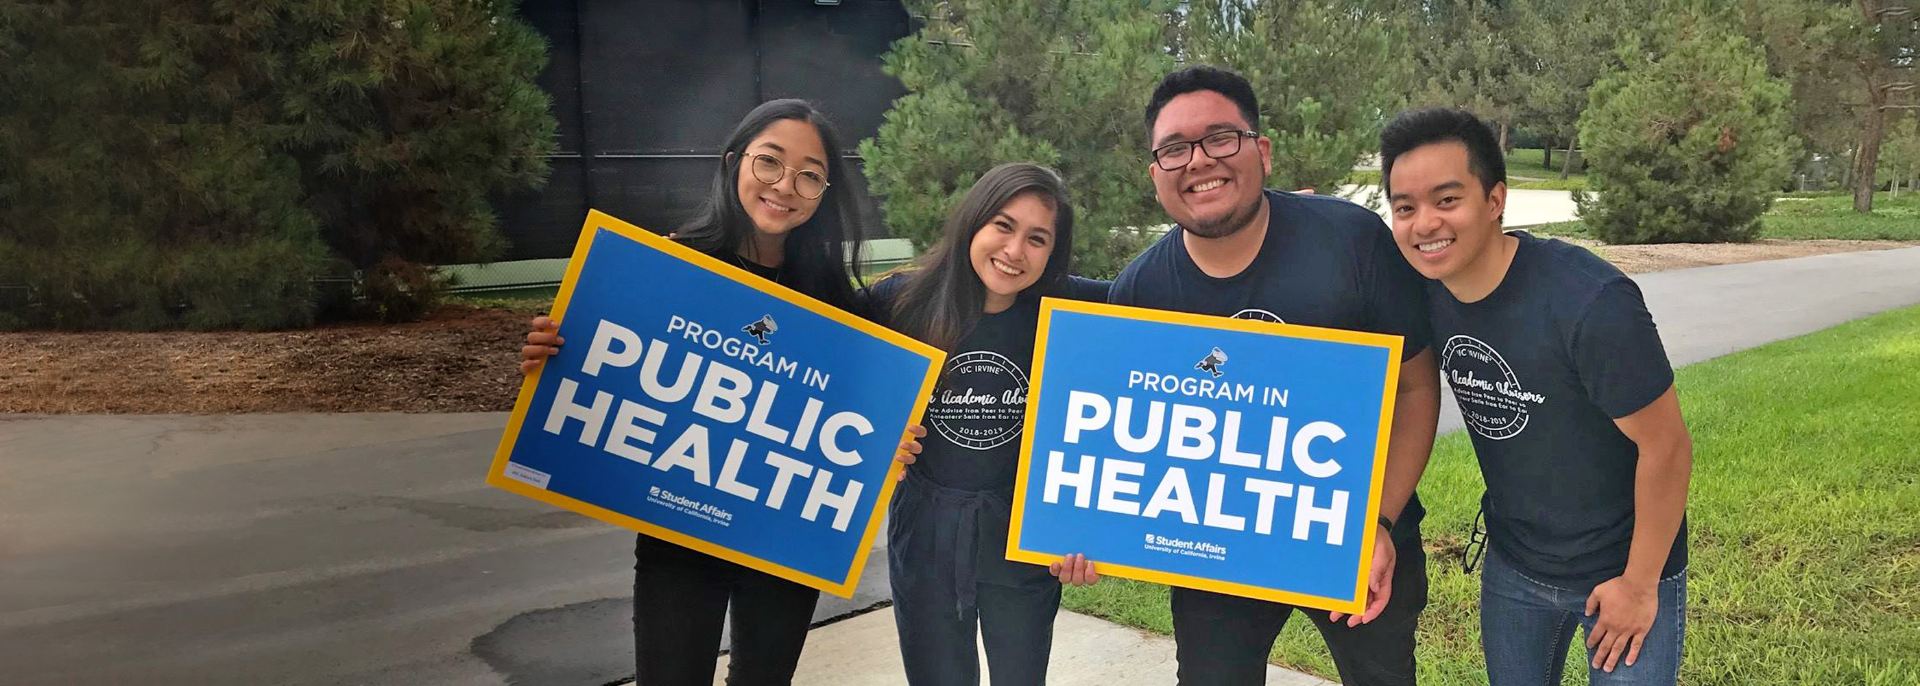 students hold public health signs